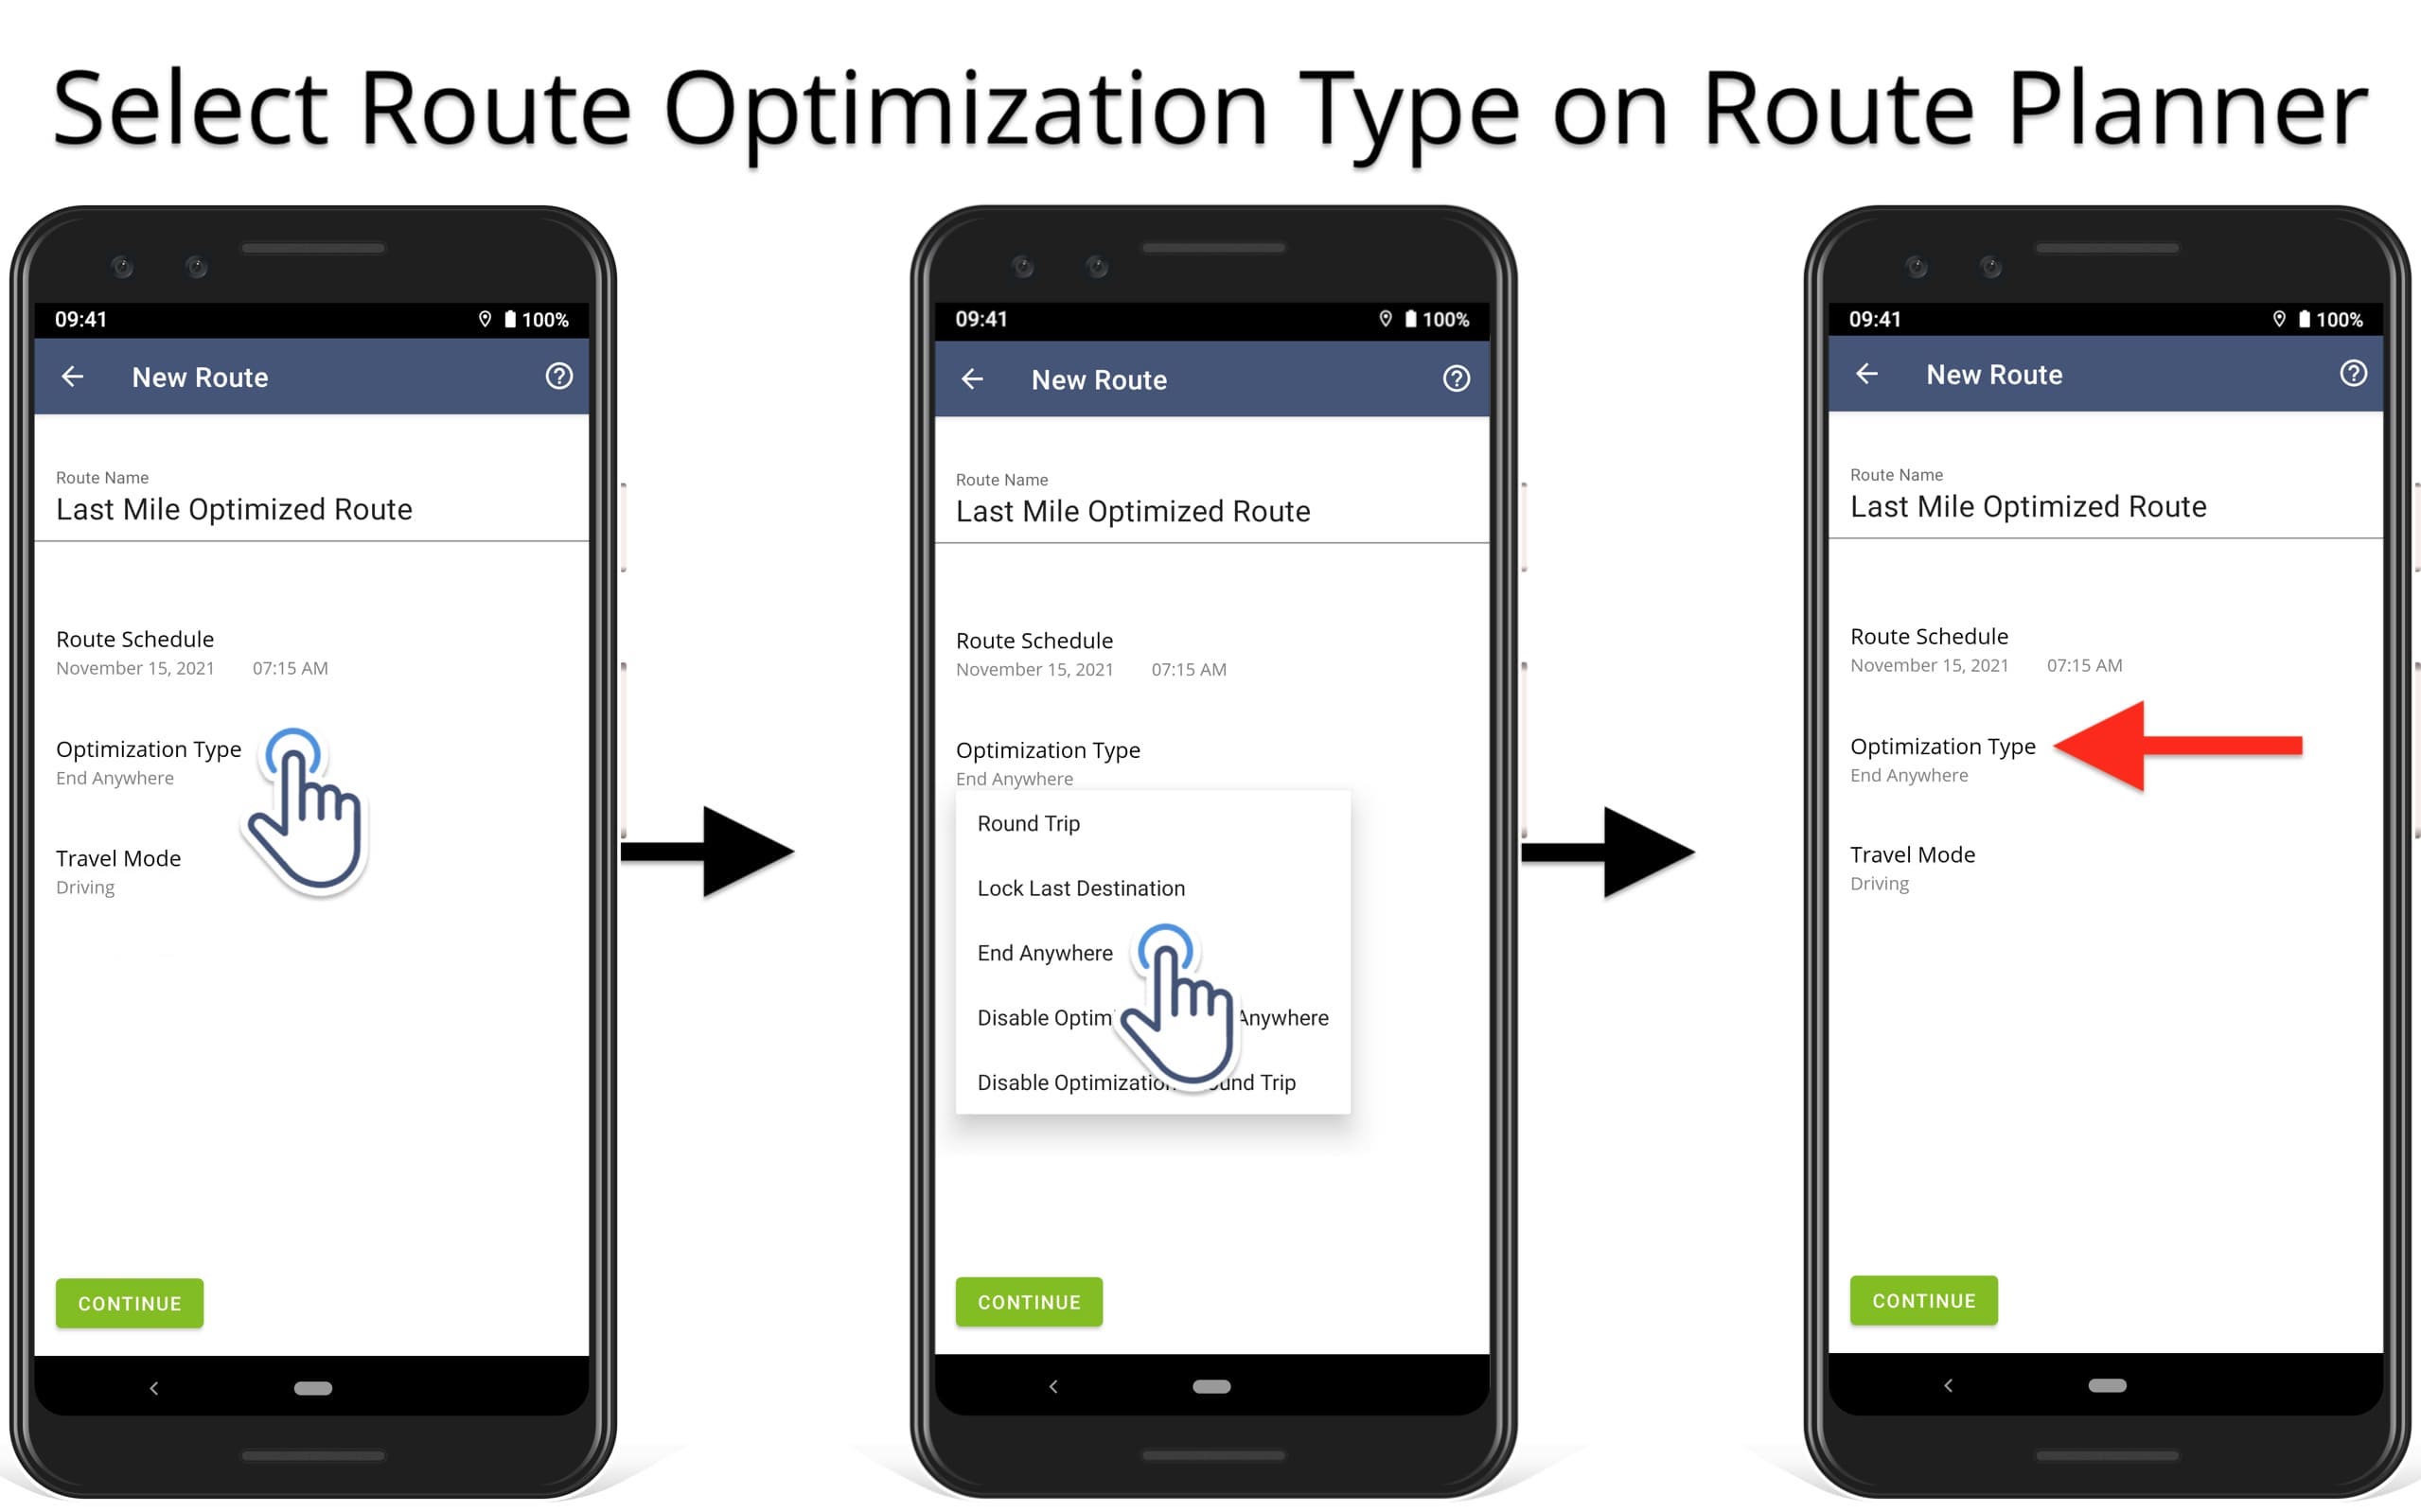 Select the preferred route optimization type to plan deliver driver and field service routes